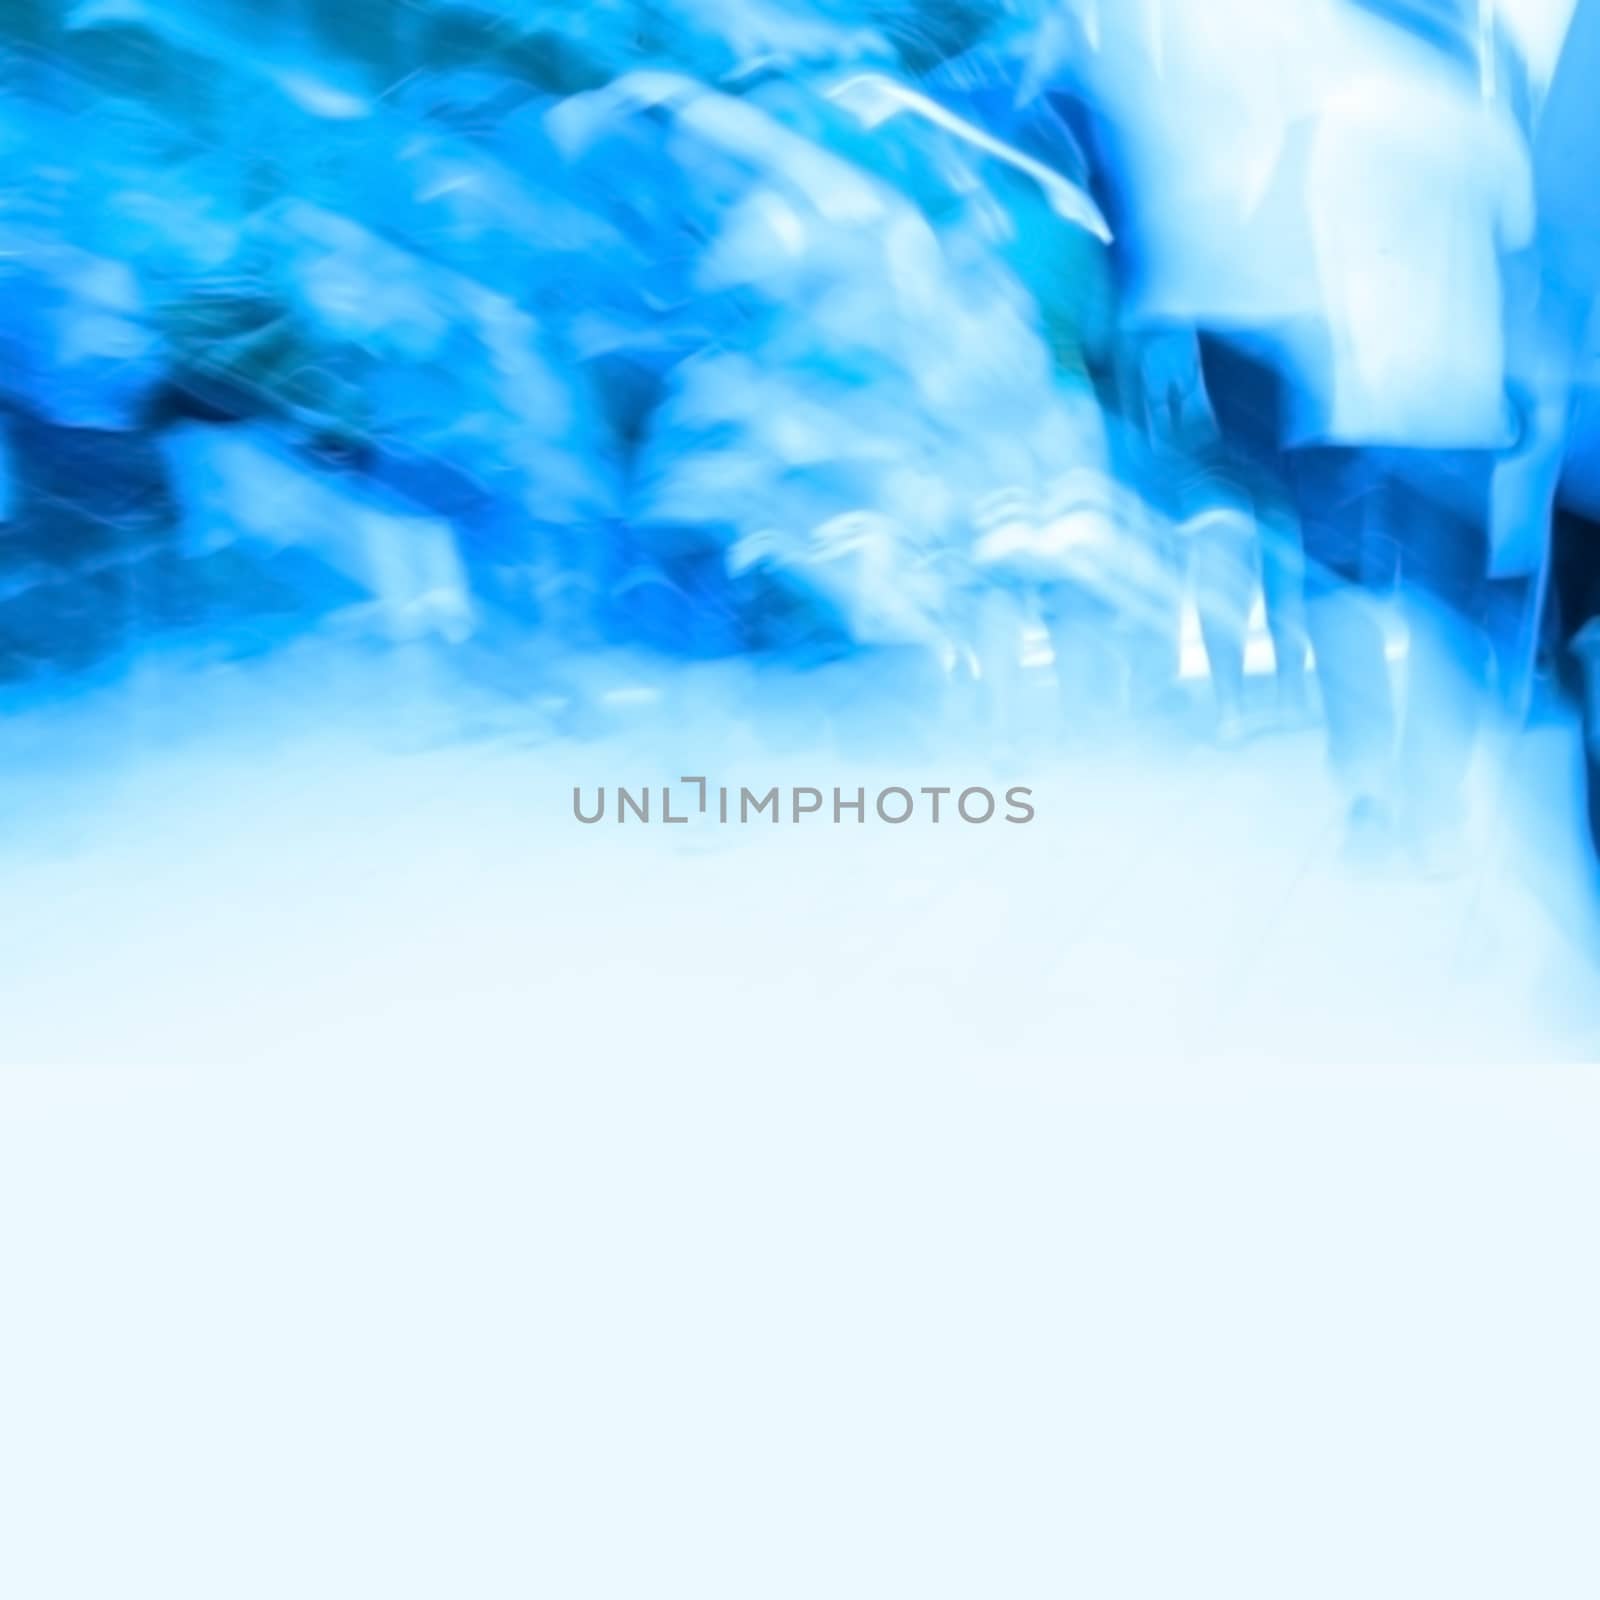 Crowd of people. Blue motion blur abstract picture with free copyspace.